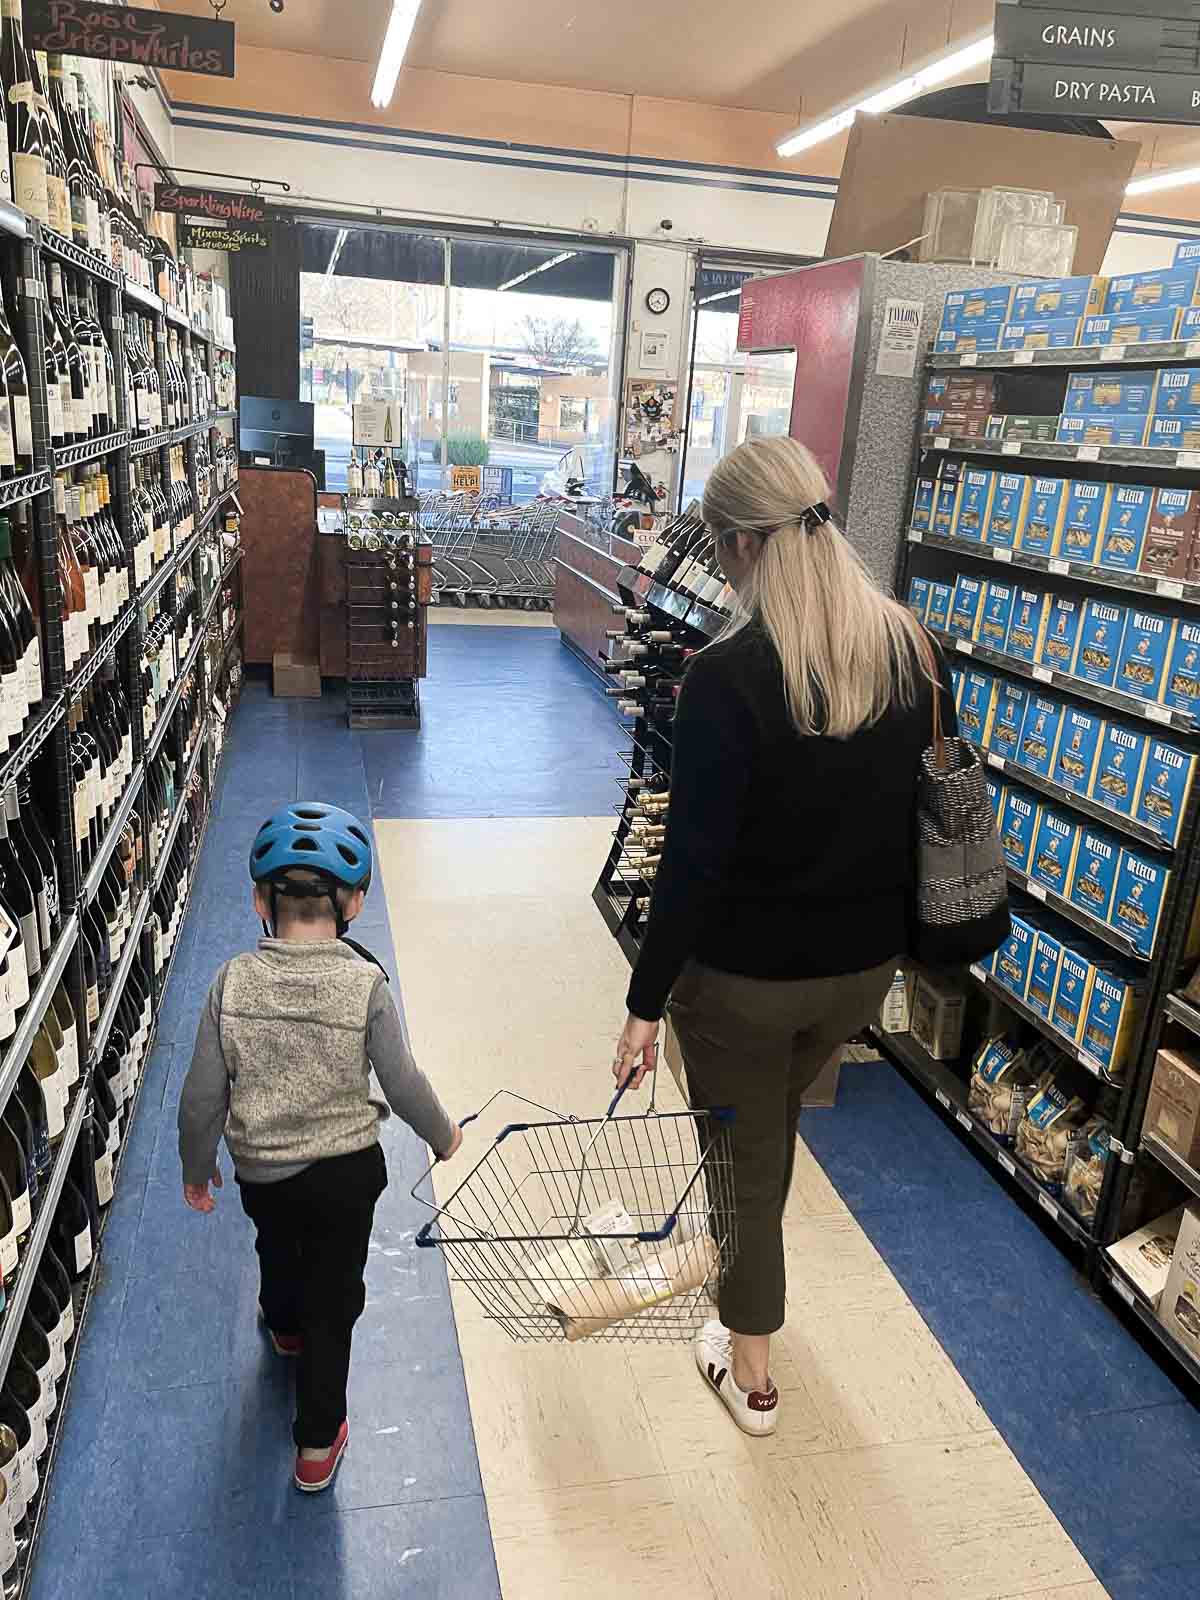 Mom Grocery Shopping with Kid - Toddlers and Food Waste